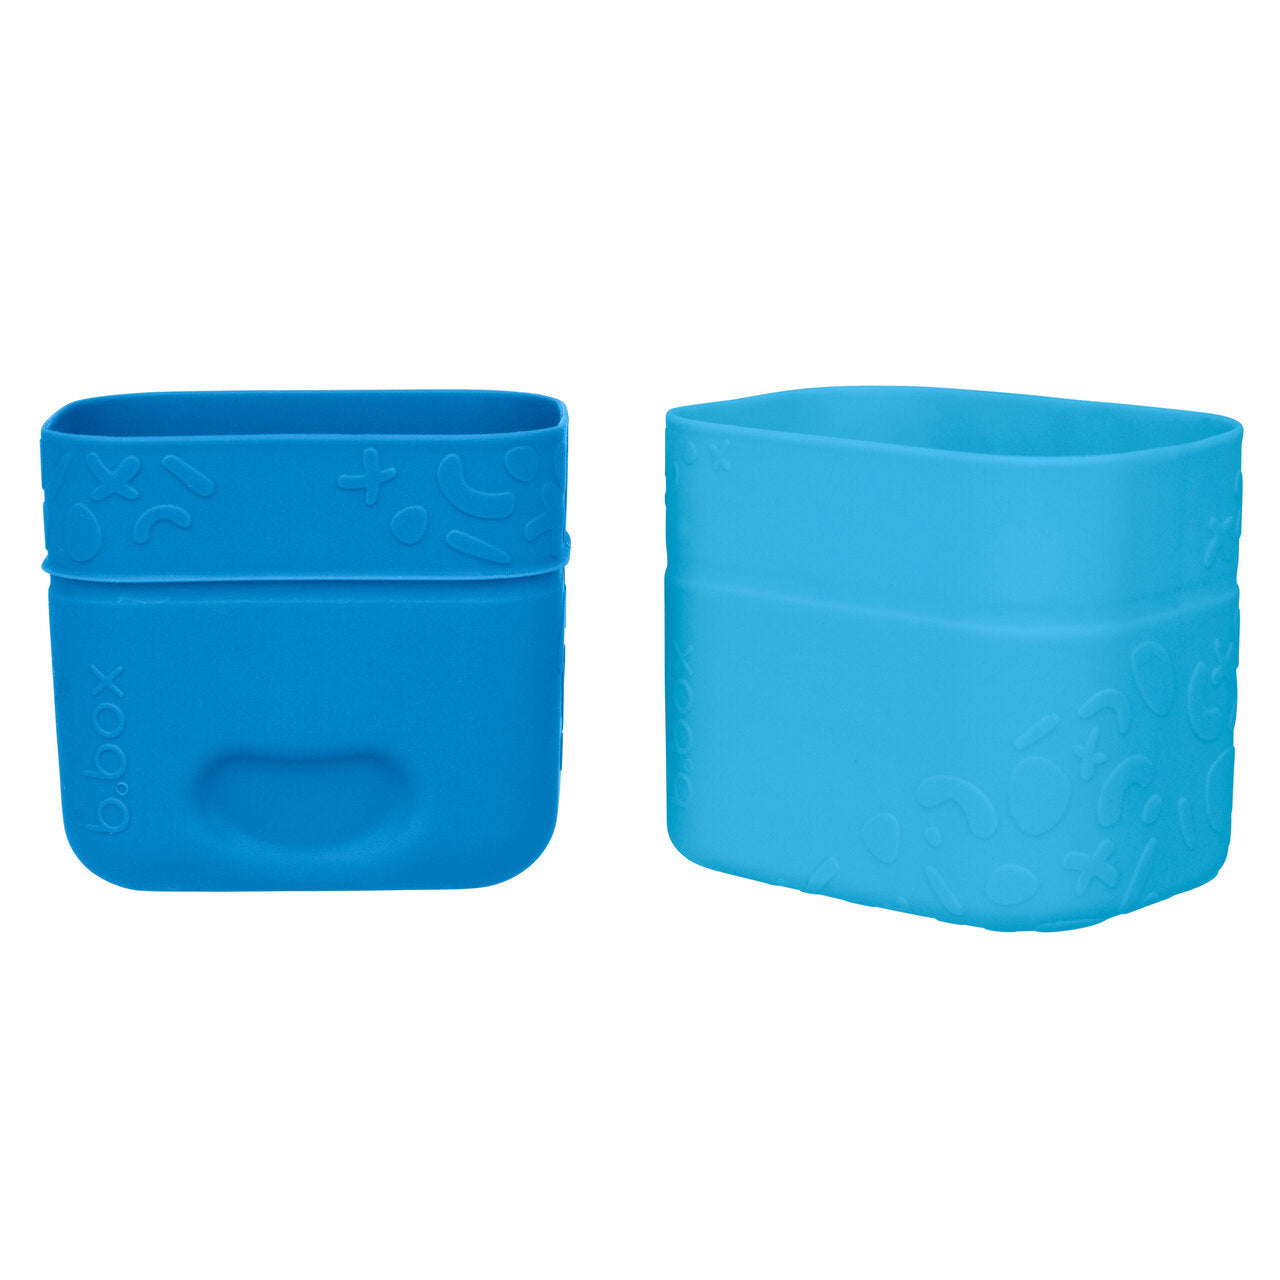 B.box Silicone Snack Cup in Ocean available at Bear & Moo